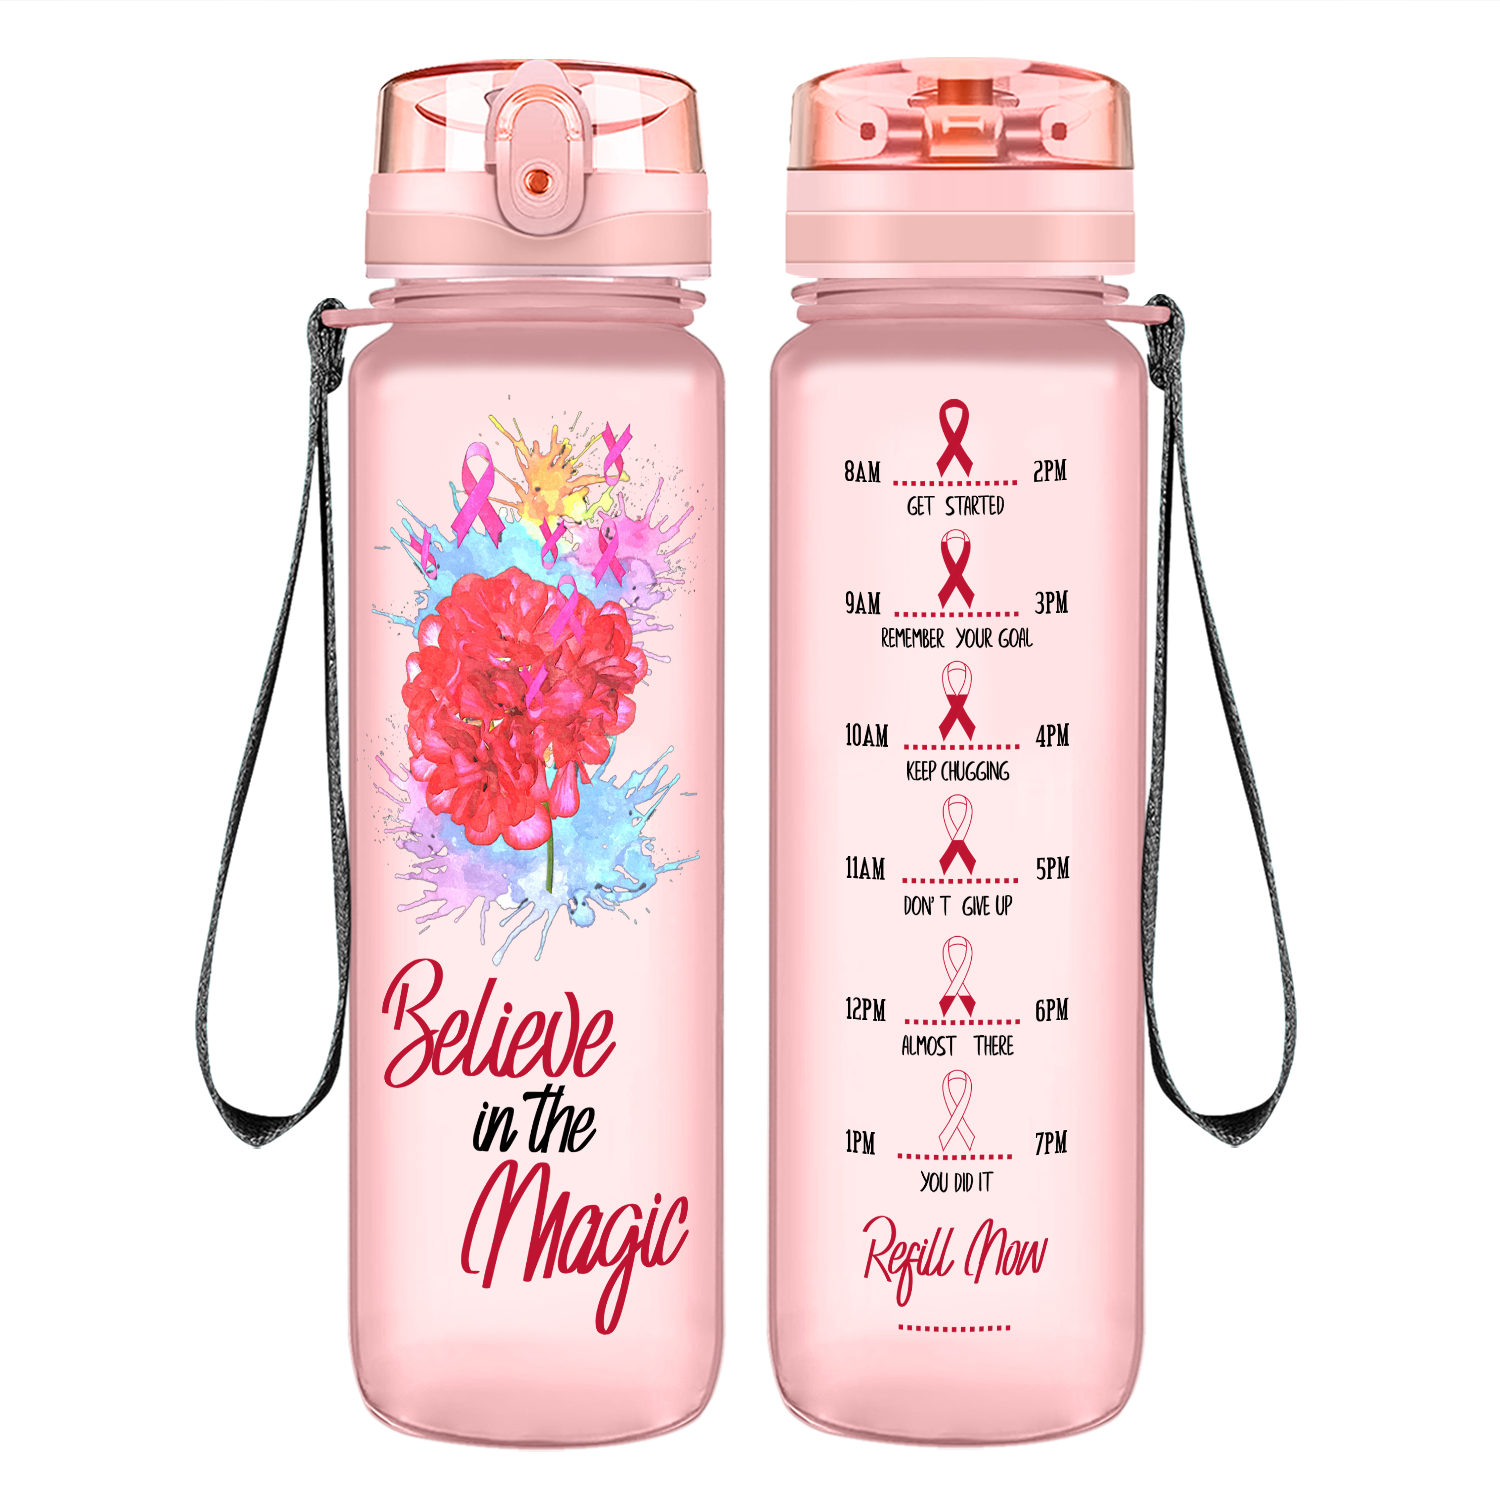 Believe in the Magic on 32 oz Motivational Tracking Water Bottle